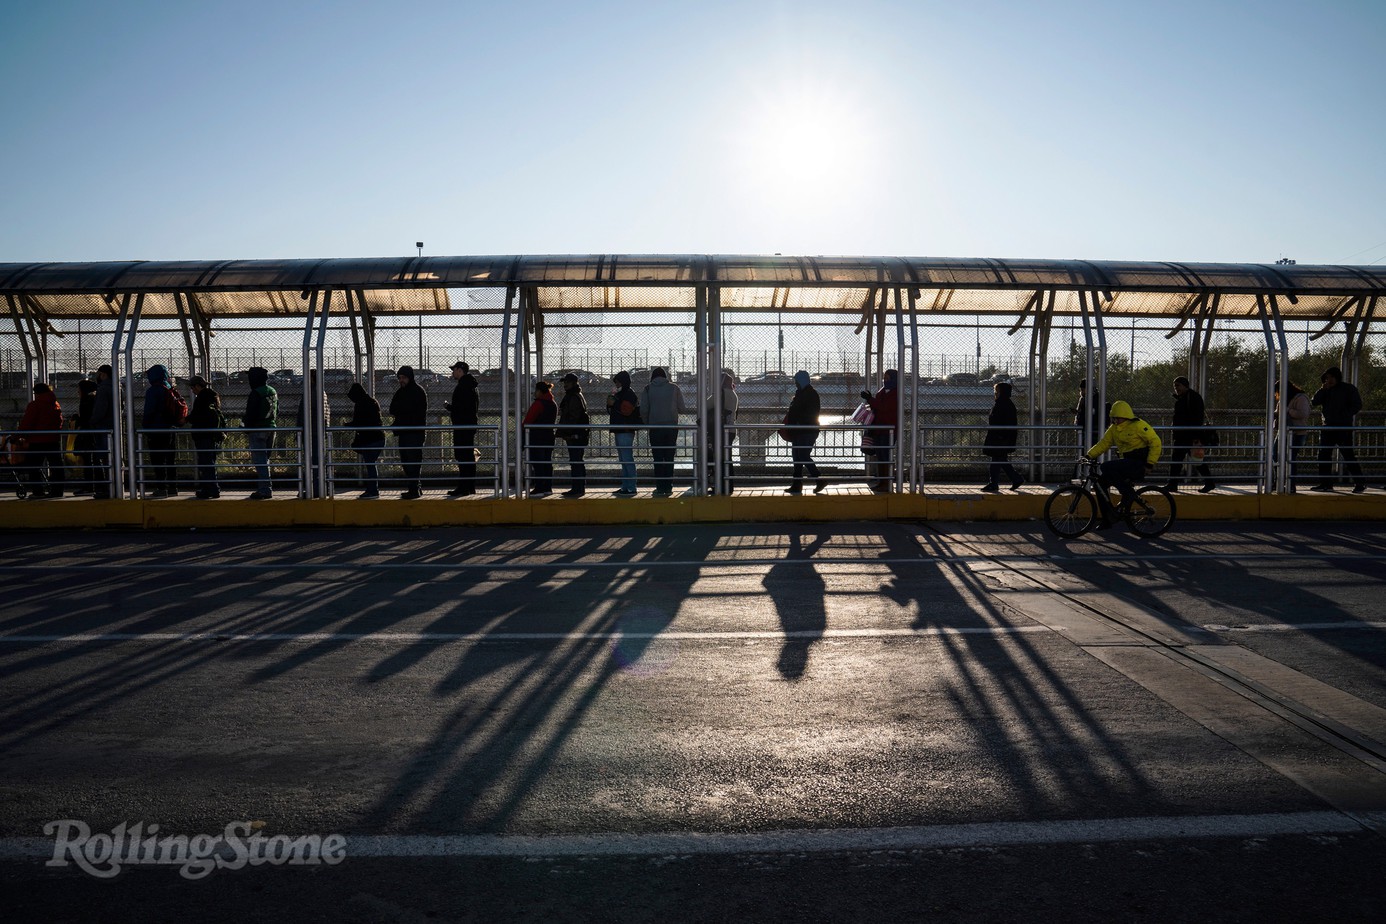 People wait in the McAllen-Hidalgo-Reynosa International Bridge to cross to the United States on Dec. 10, 2018. Verónica G. Cárdenas for Rolling Stone